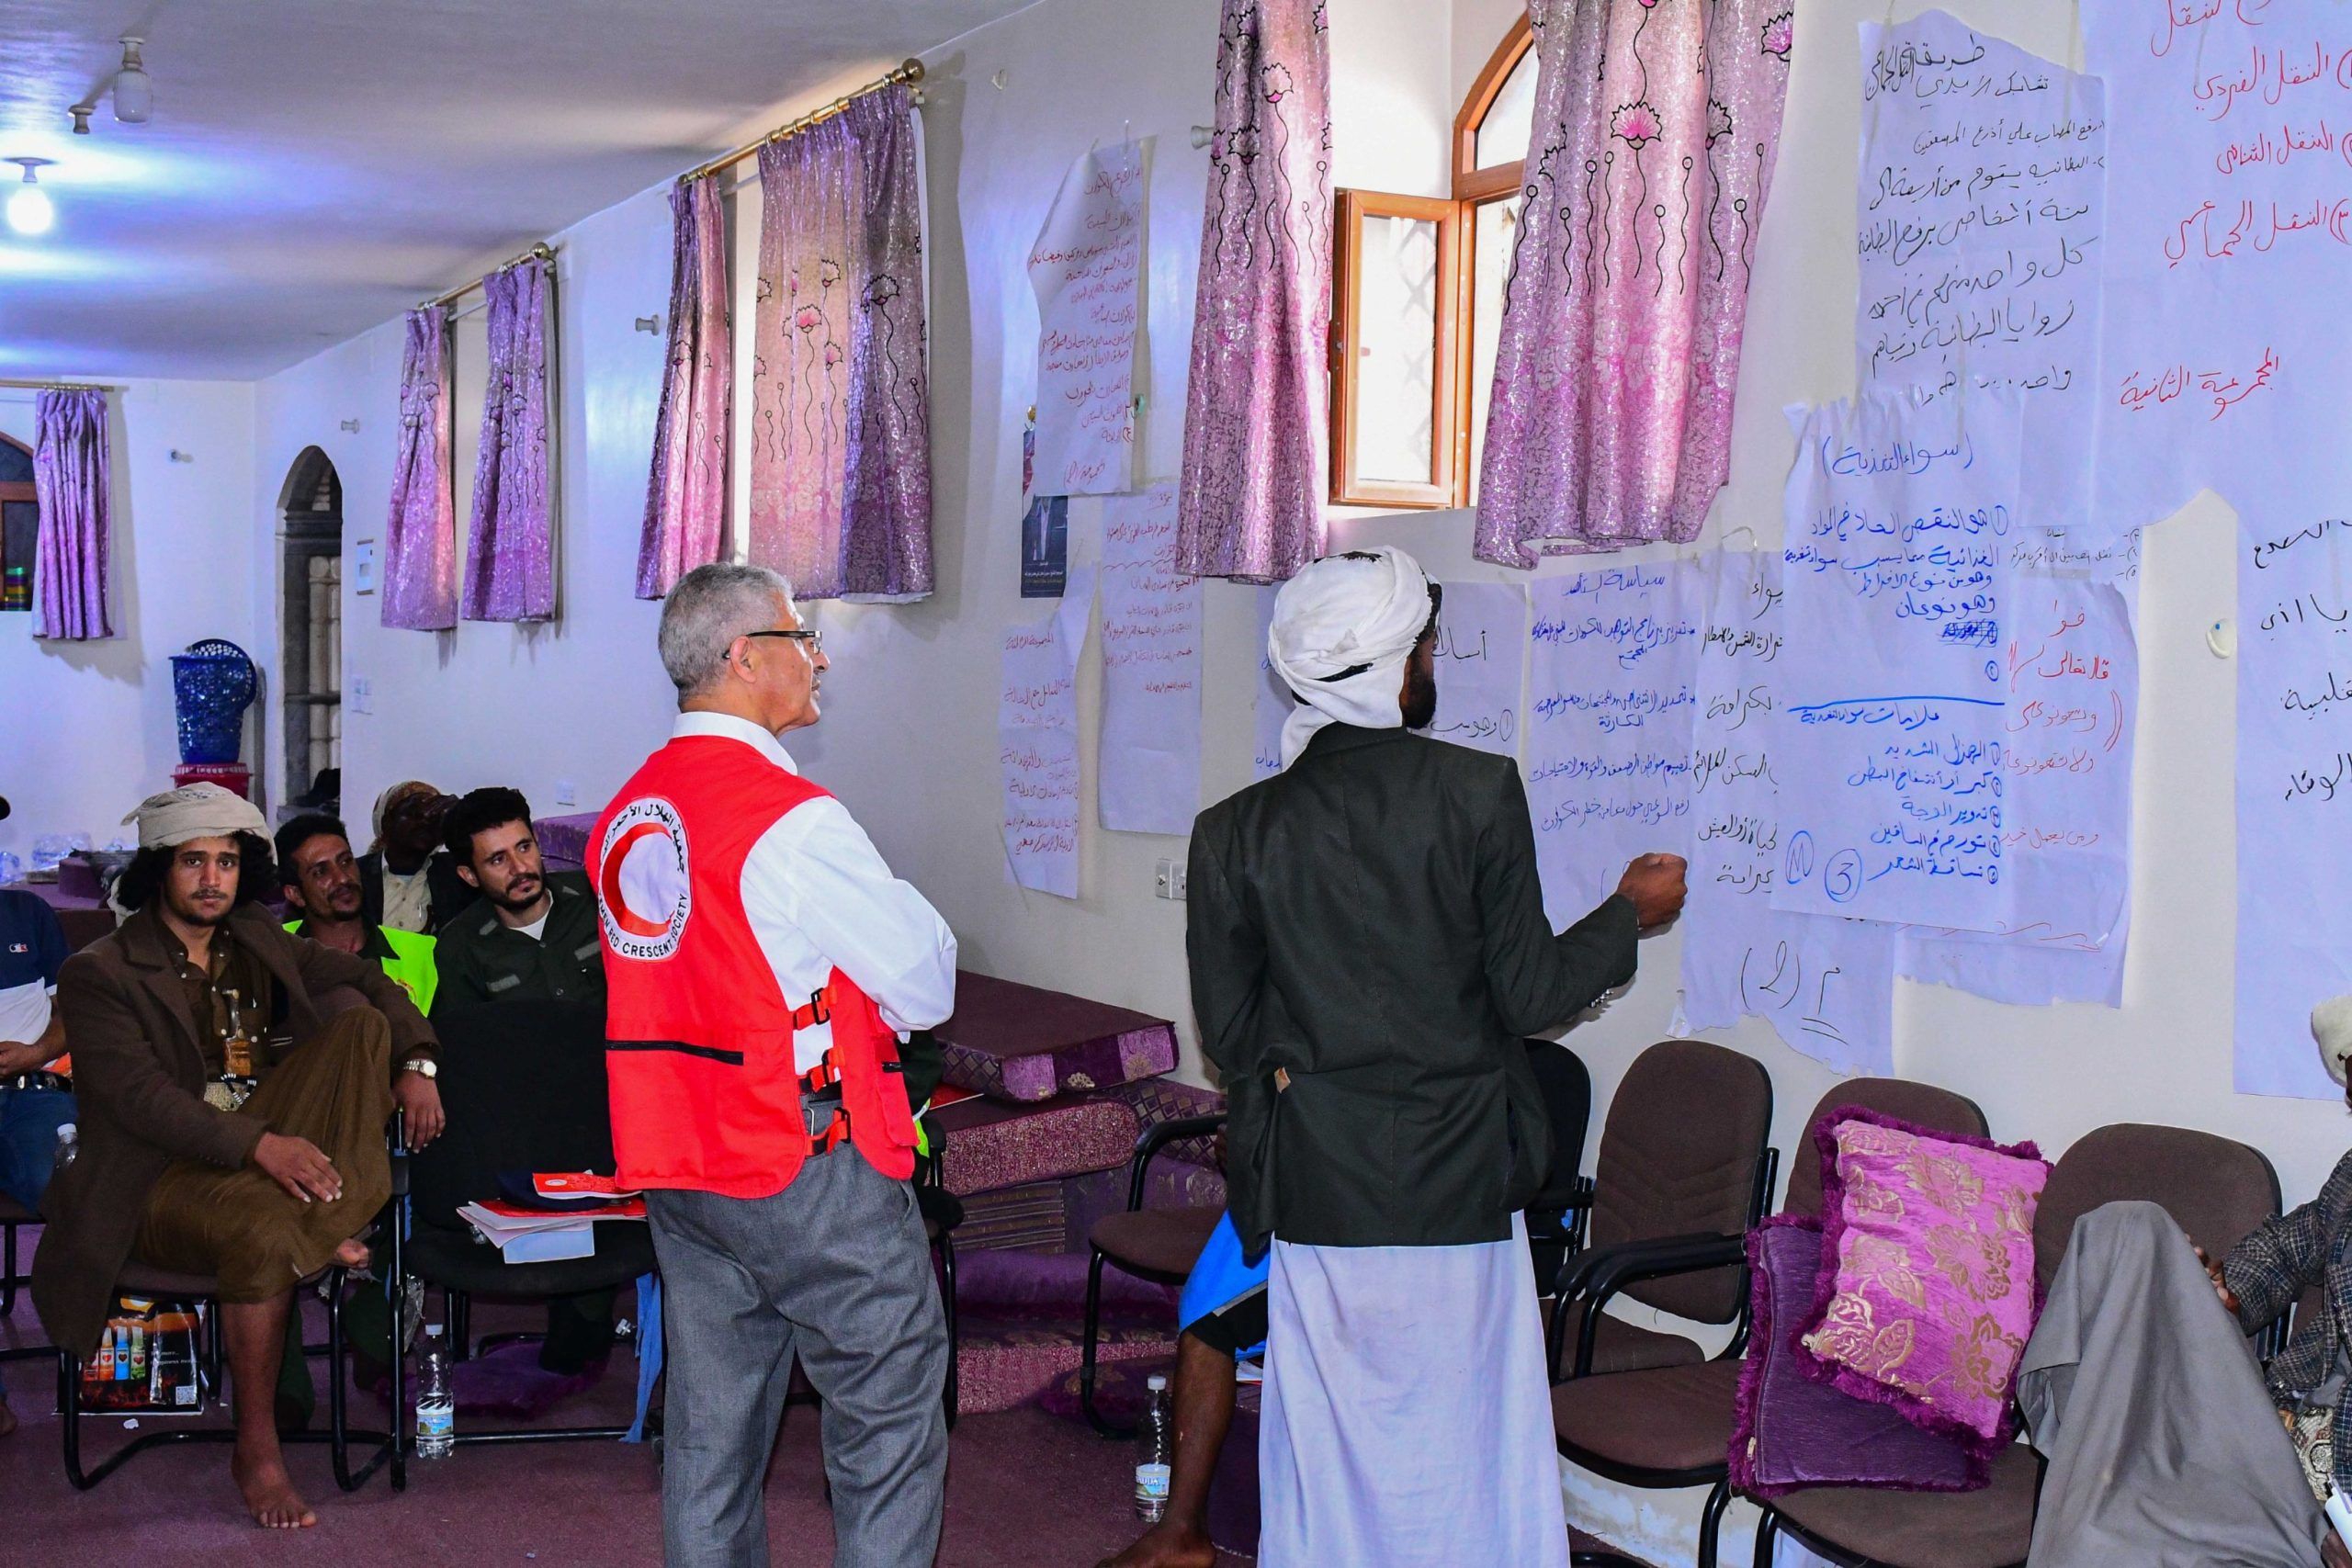 Disaster Preparedness and Emergency Response Training for 90 community team members in Sana’a